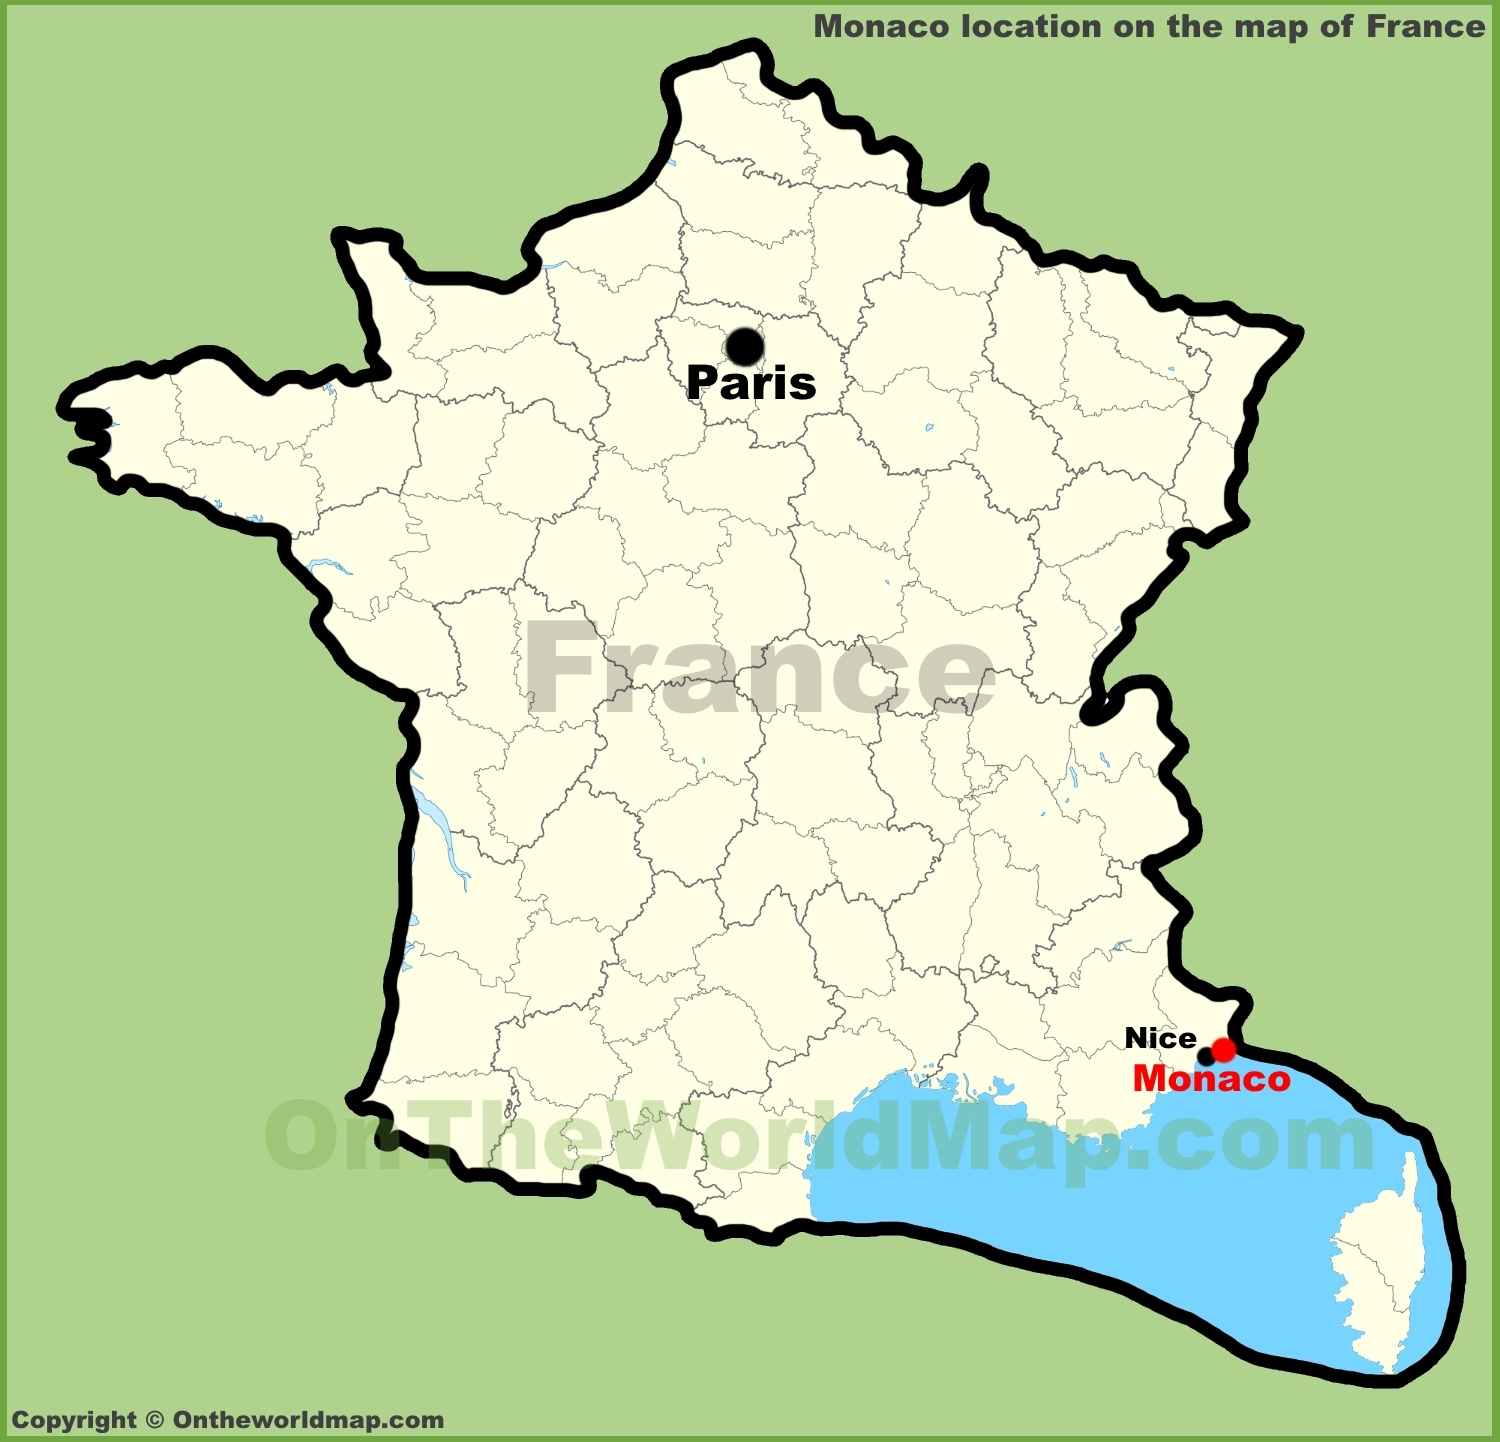 Monaco Location On The Map Of France